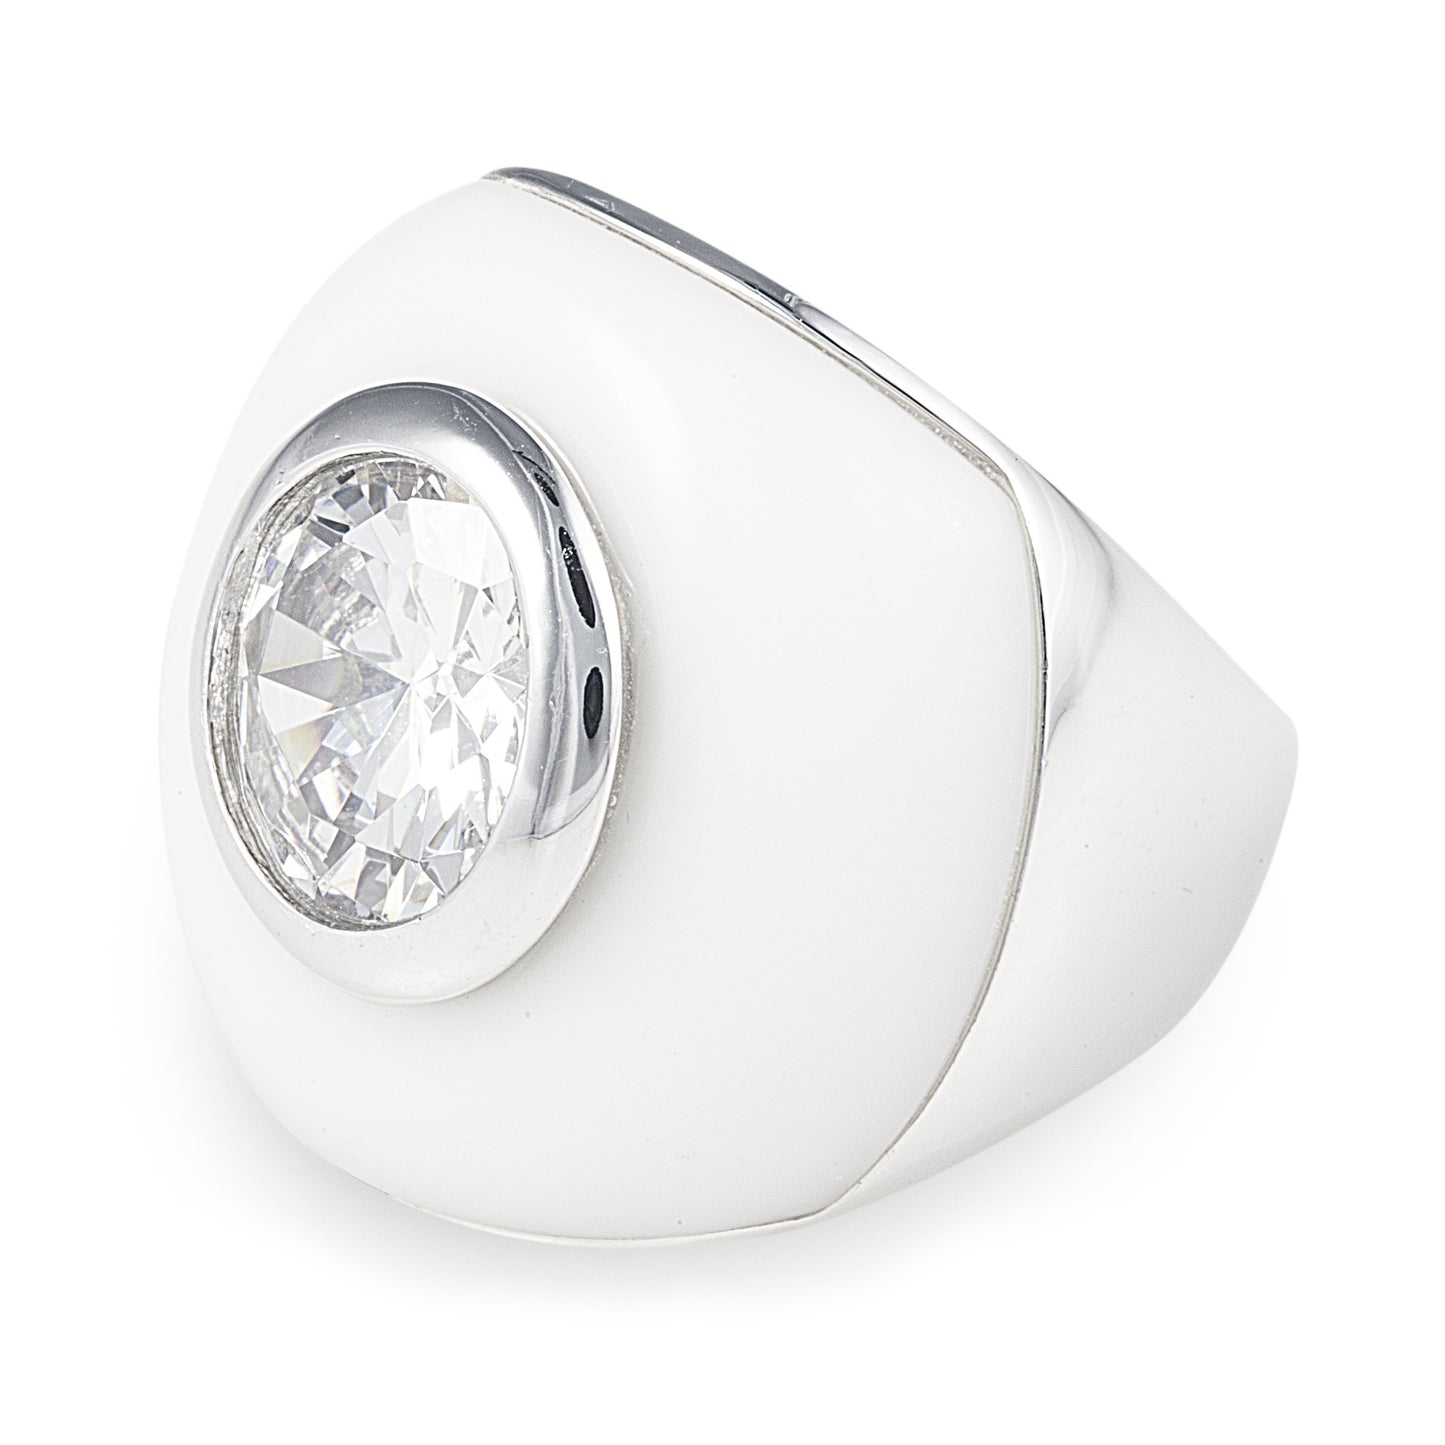 The Bianca Ring is a stunning white ceramic overlay on a 925 sterling silver tapered ring, which holds a 3-carat 'set in' centre cubic zirconia stone. Shop rings & affordable luxury jewellery by Bellagio & Co. Worldwide shipping.